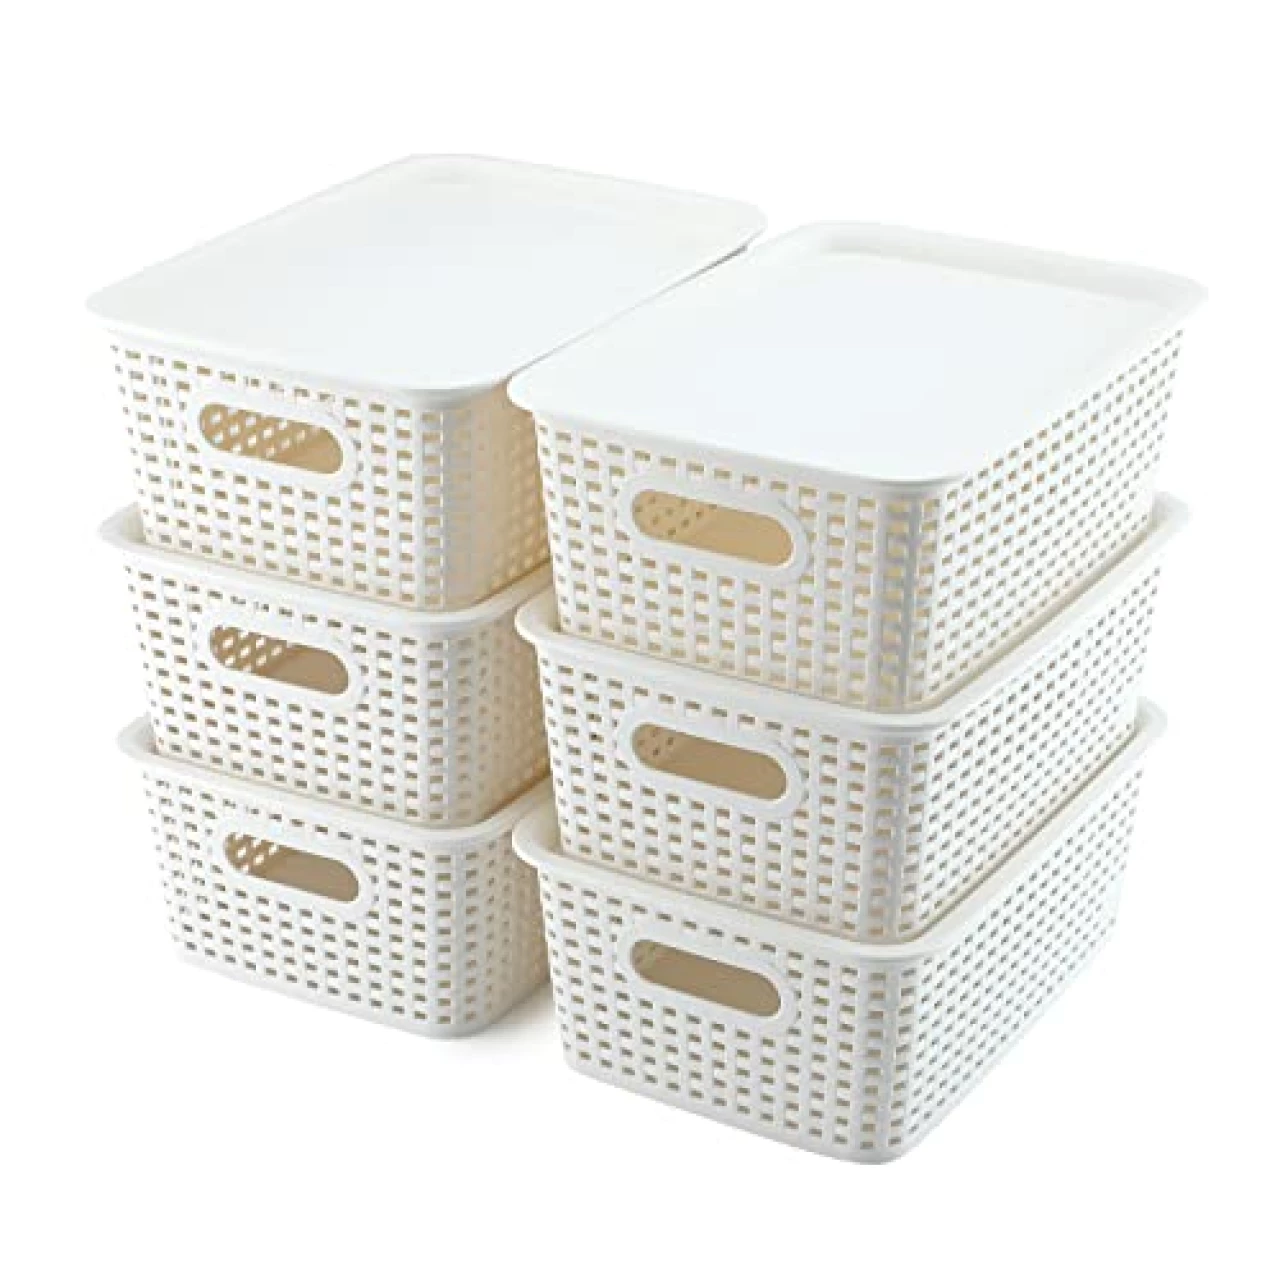 AREYZIN Plastic Storage Baskets With Lid Organizing Container Lidded Knit Storage Organizer Bins for Shelves Drawers Desktop Closet Playroom Classroom Office, White, 6 Pack